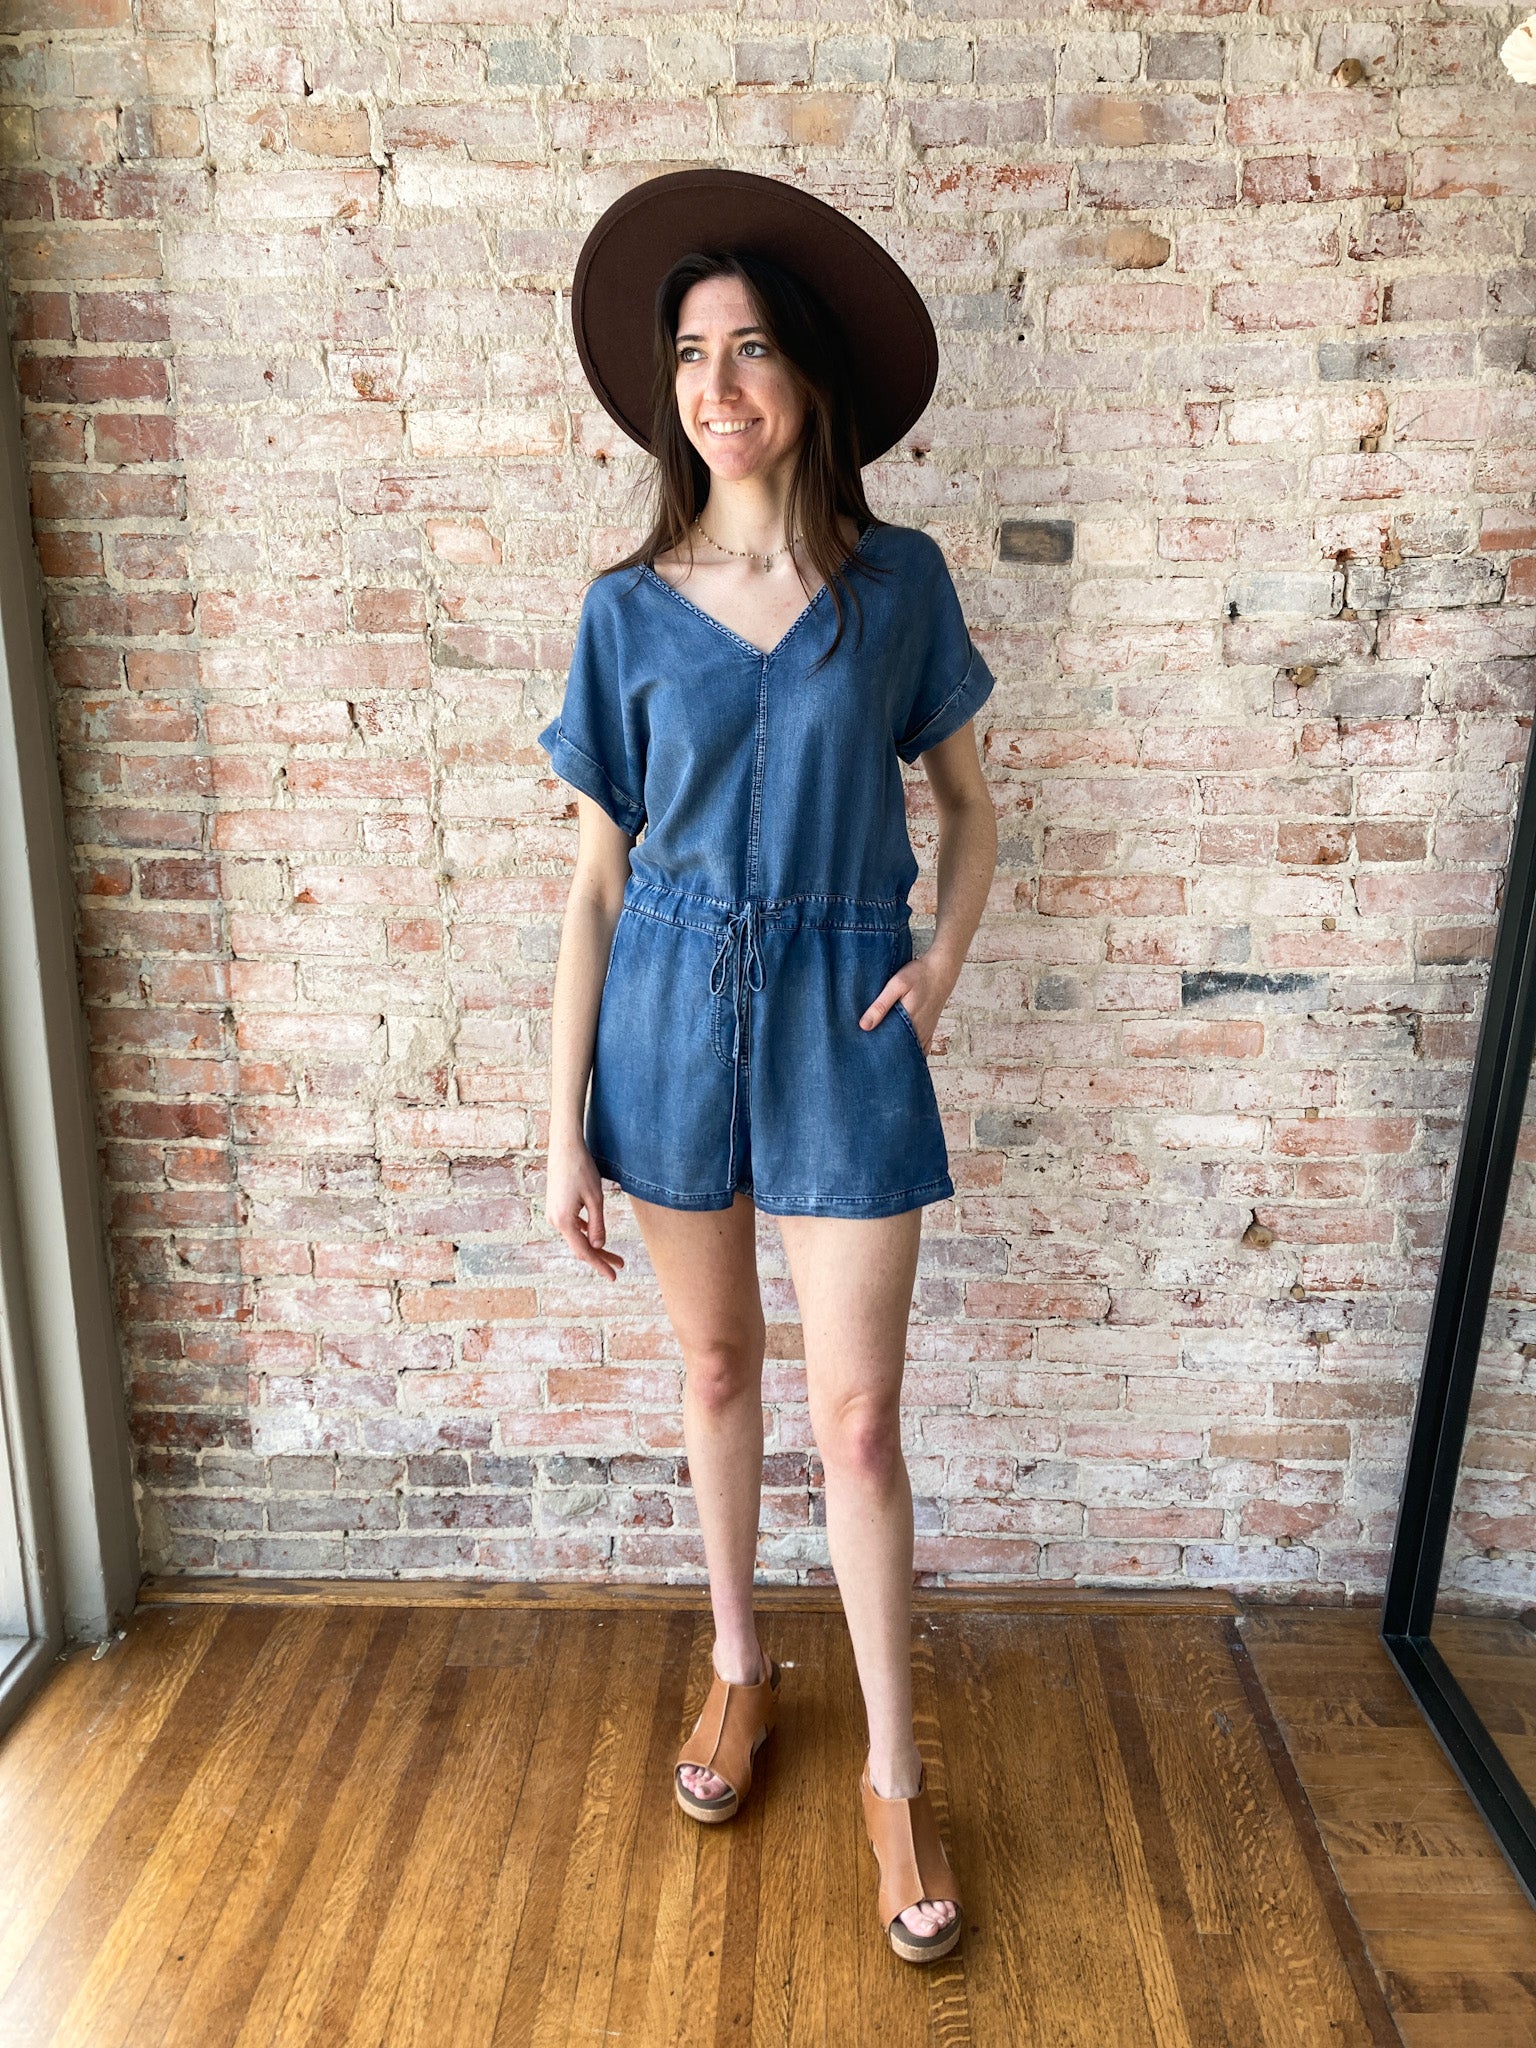 A young girl in her 30s wearing a denim romper and a big brown hat and platform shoes.